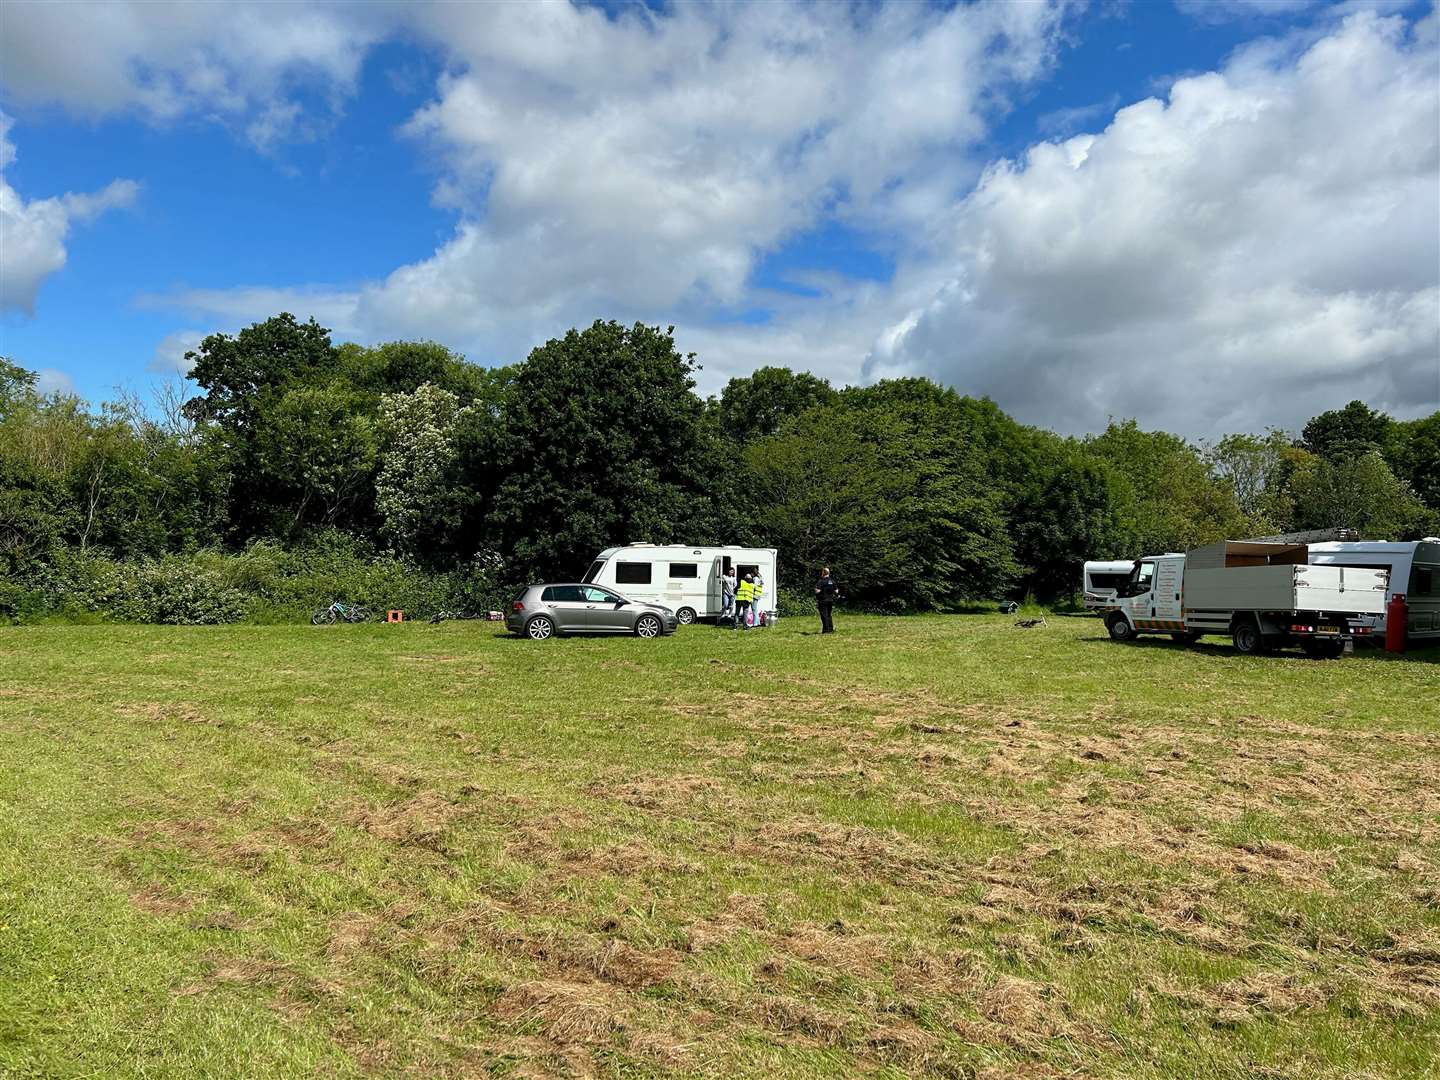 Police are in attendance and are speaking with the travellers in Kinsgnorth, Ashford